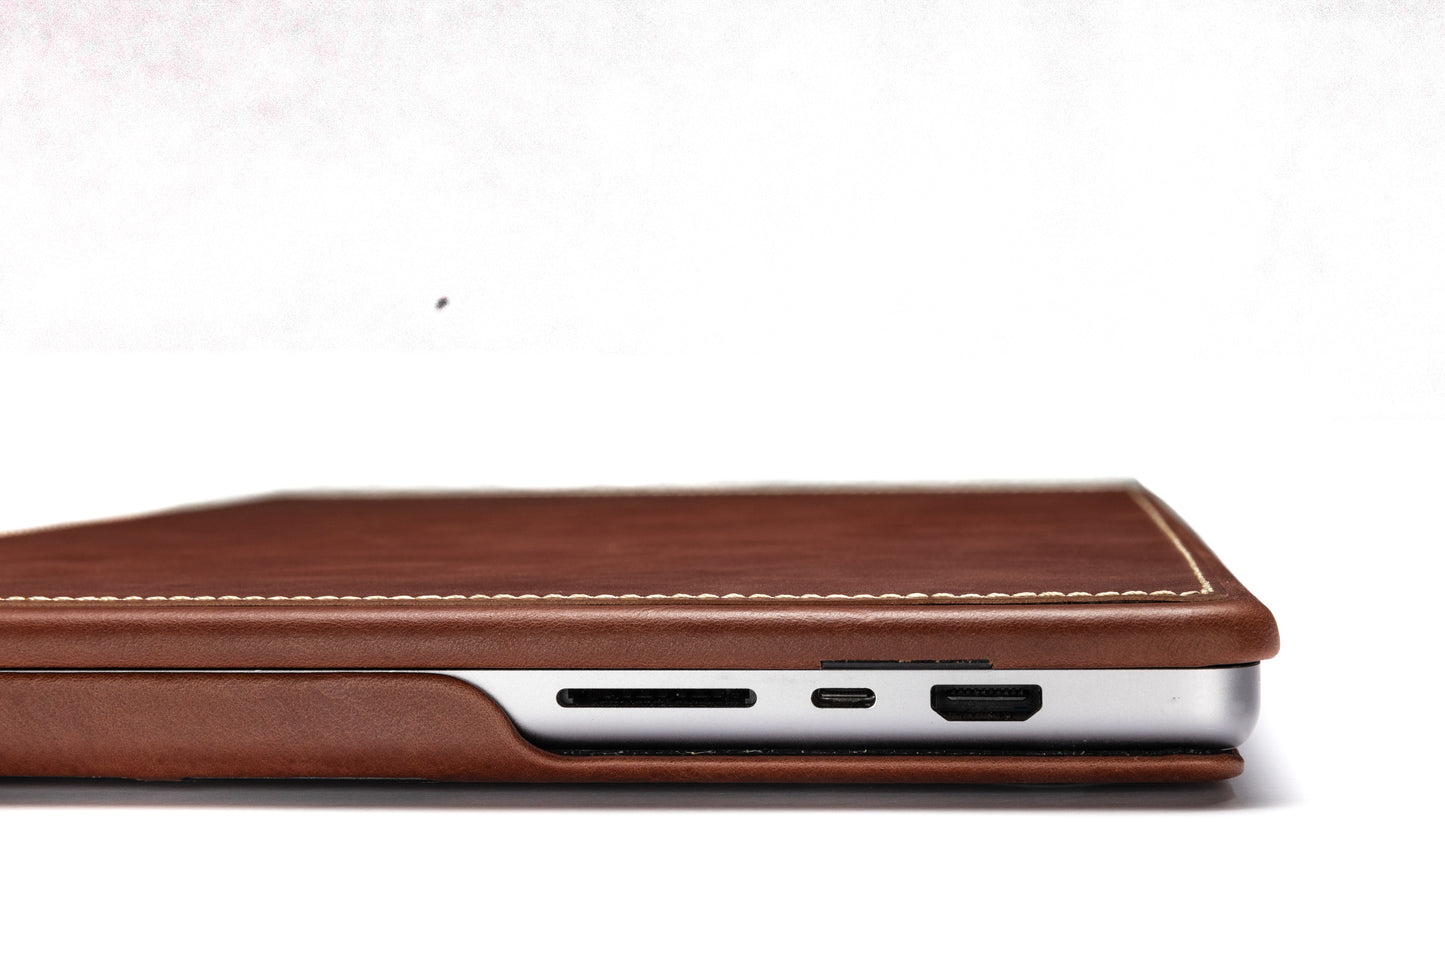 Luxury Leather Slim Case For MacBook Pro 16 Inch